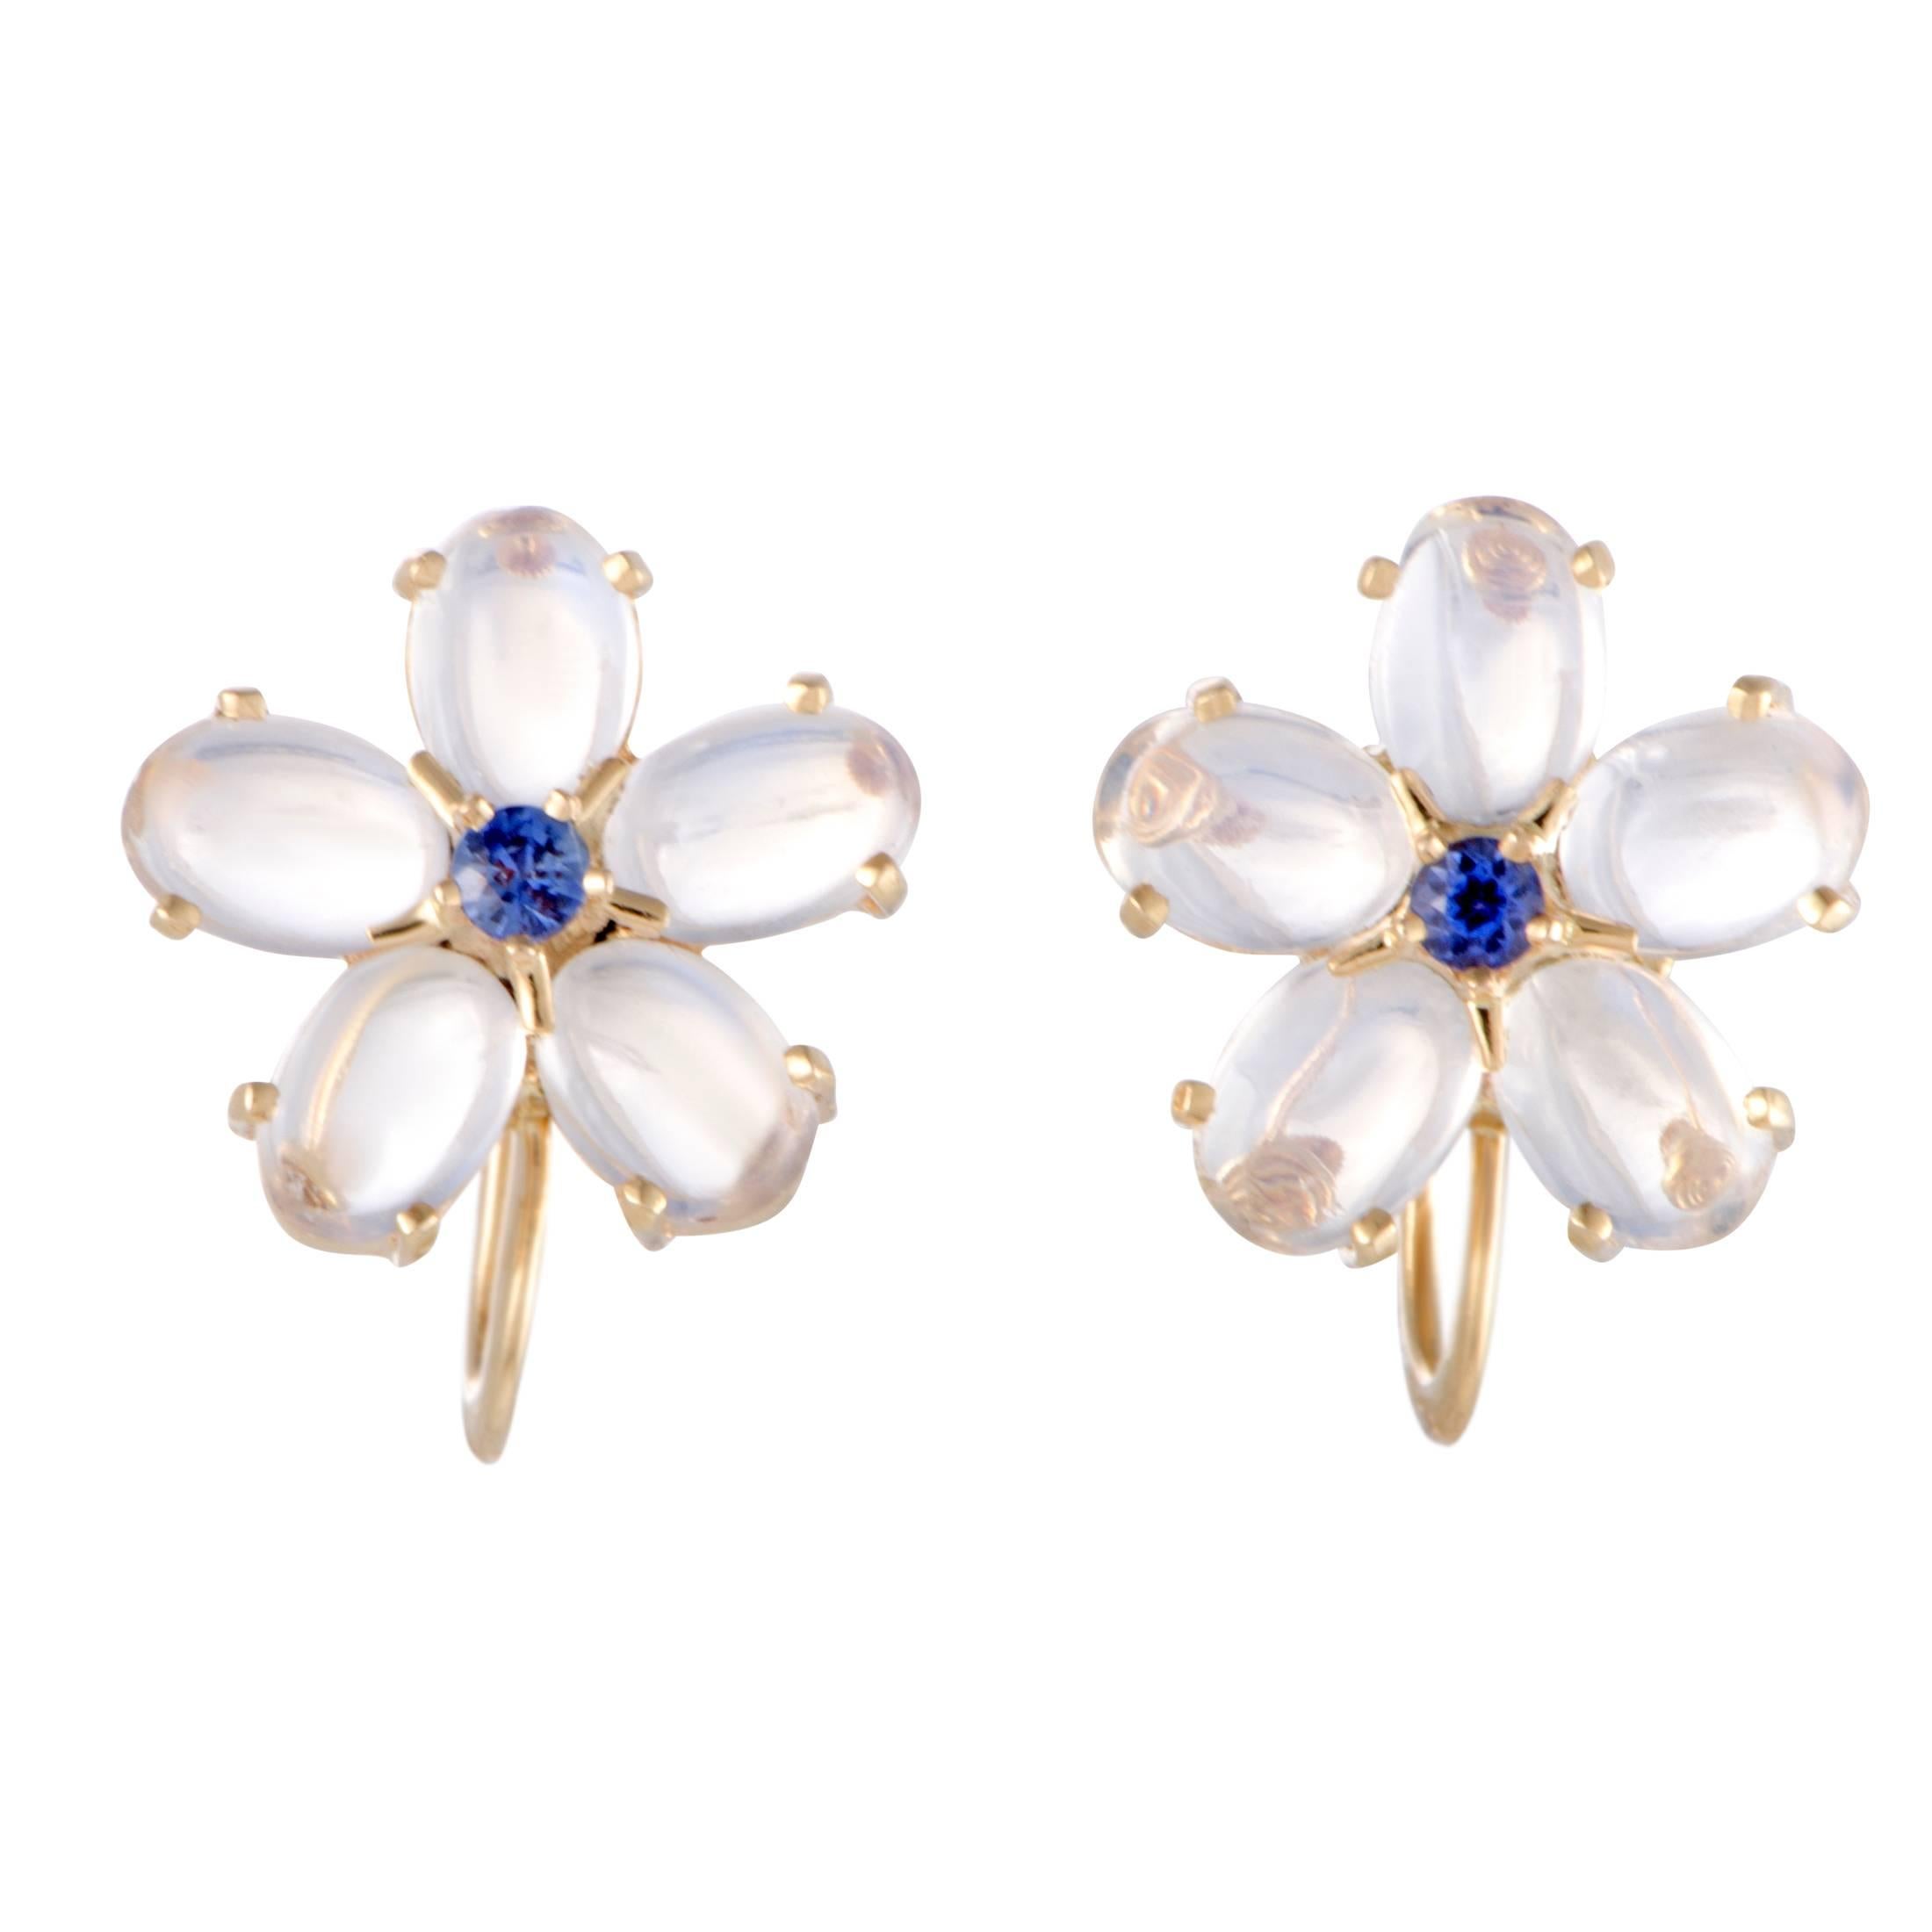 Tiffany & Co. Sapphire and Aquamarine Floral Earrings